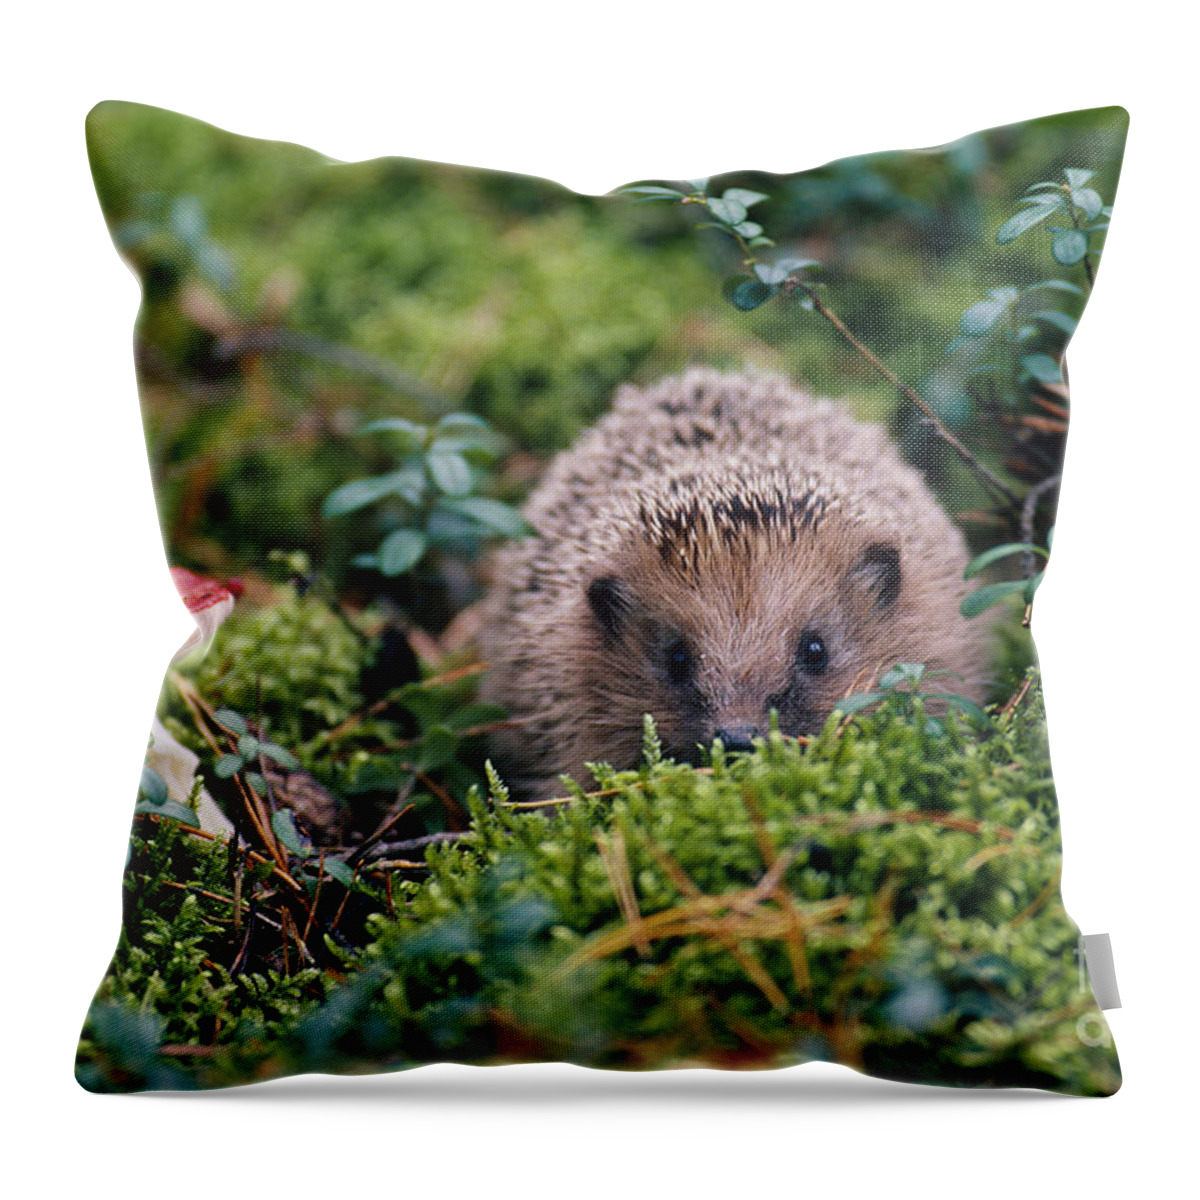 Hedgehog Throw Pillow featuring the photograph Hedgehog, Russia by Art Wolfe